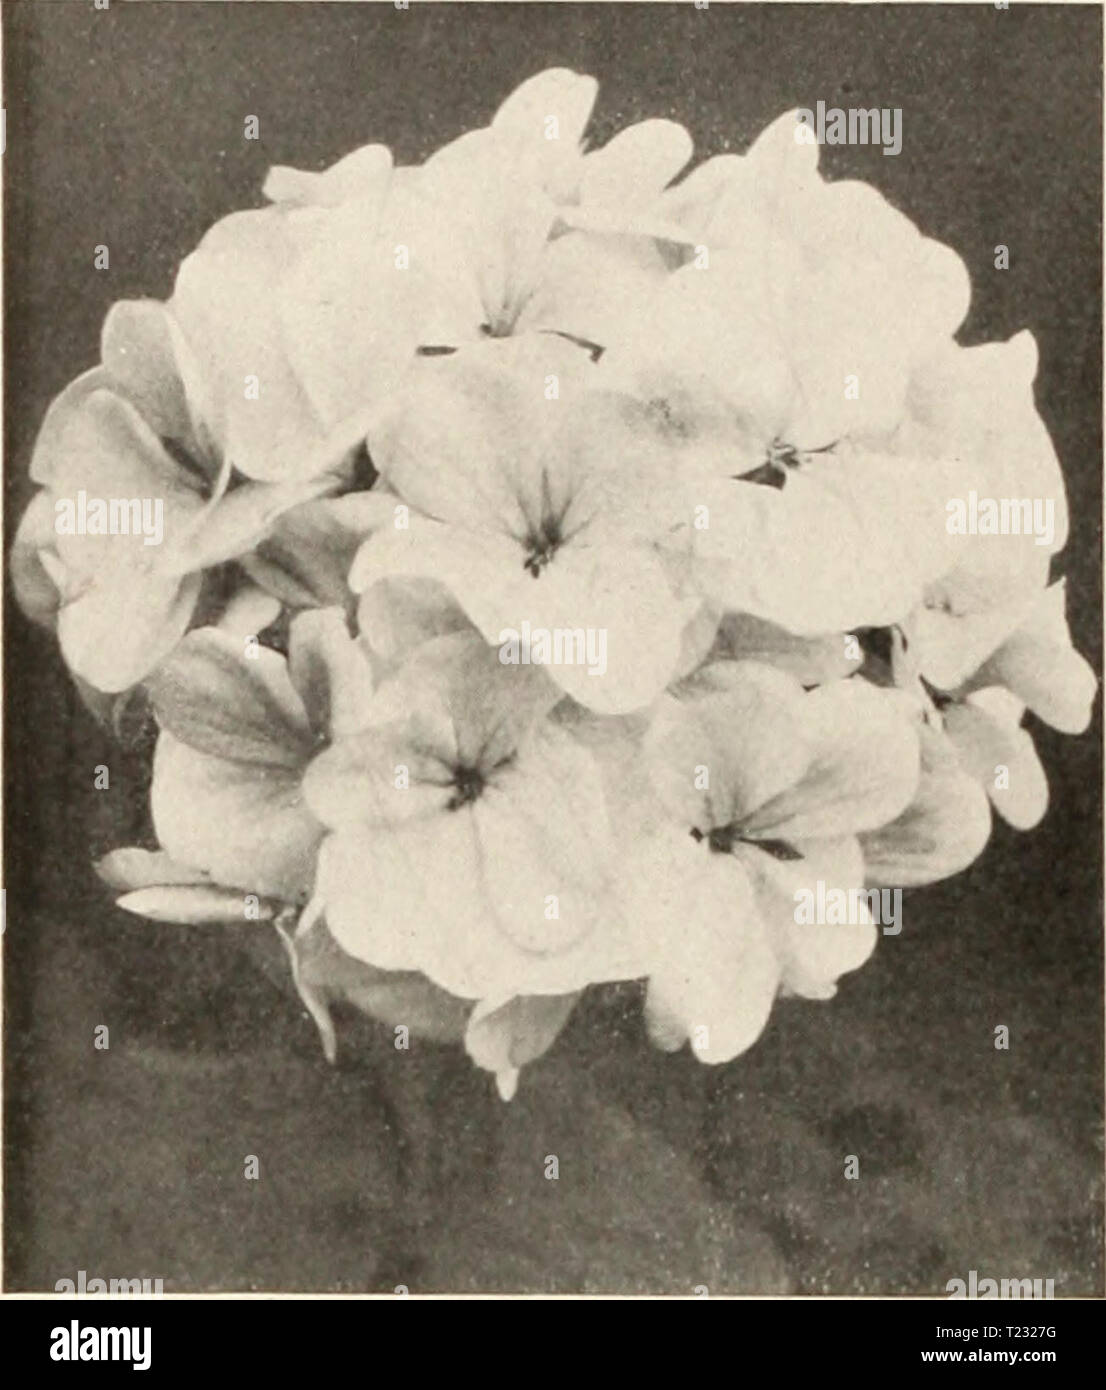 Archive image from page 77 of Dingee guide to rose culture Dingee guide to rose culture : for more than 60 years an authority  dingeeguidetoros19ding 5 Year: 1914  DiNGEE Guide To Rose Culture â- â g.s&gt;s- â =-9fejÂ»-    Single Geranium Choice Dingee Geraniums The Best New Double Geraniums I'rlrCN, NironK pliintN. tr&gt;o. rnclt. 4 for ifl.OI) r&lt;;r Ni-t of lU. io. Jean Viaiiil. Soft. pink, white blotches. Double .fÂ»- L.lfe. Outer flowers brilliant red; cen- ter pure white liowers. E. H. Trego. Dazzling scarlet, velvety. AIplion.se Rienrd. Semi-double; orange-red. Thomns Meelian (New Br Stock Photo